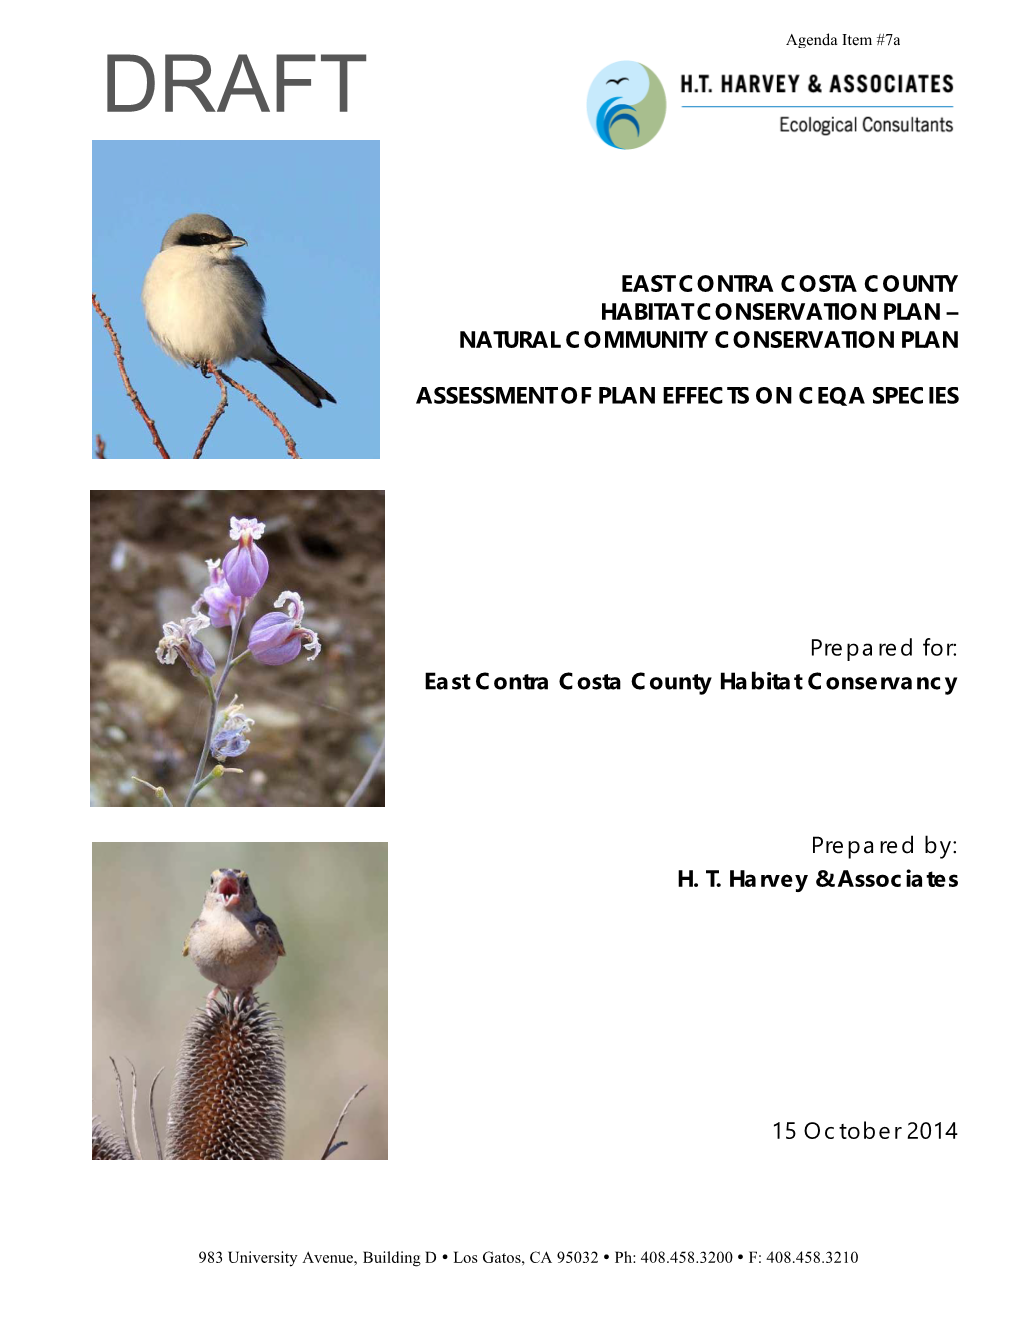 East Contra Costa County Habitat Conservation Plan – Natural Community Conservation Plan